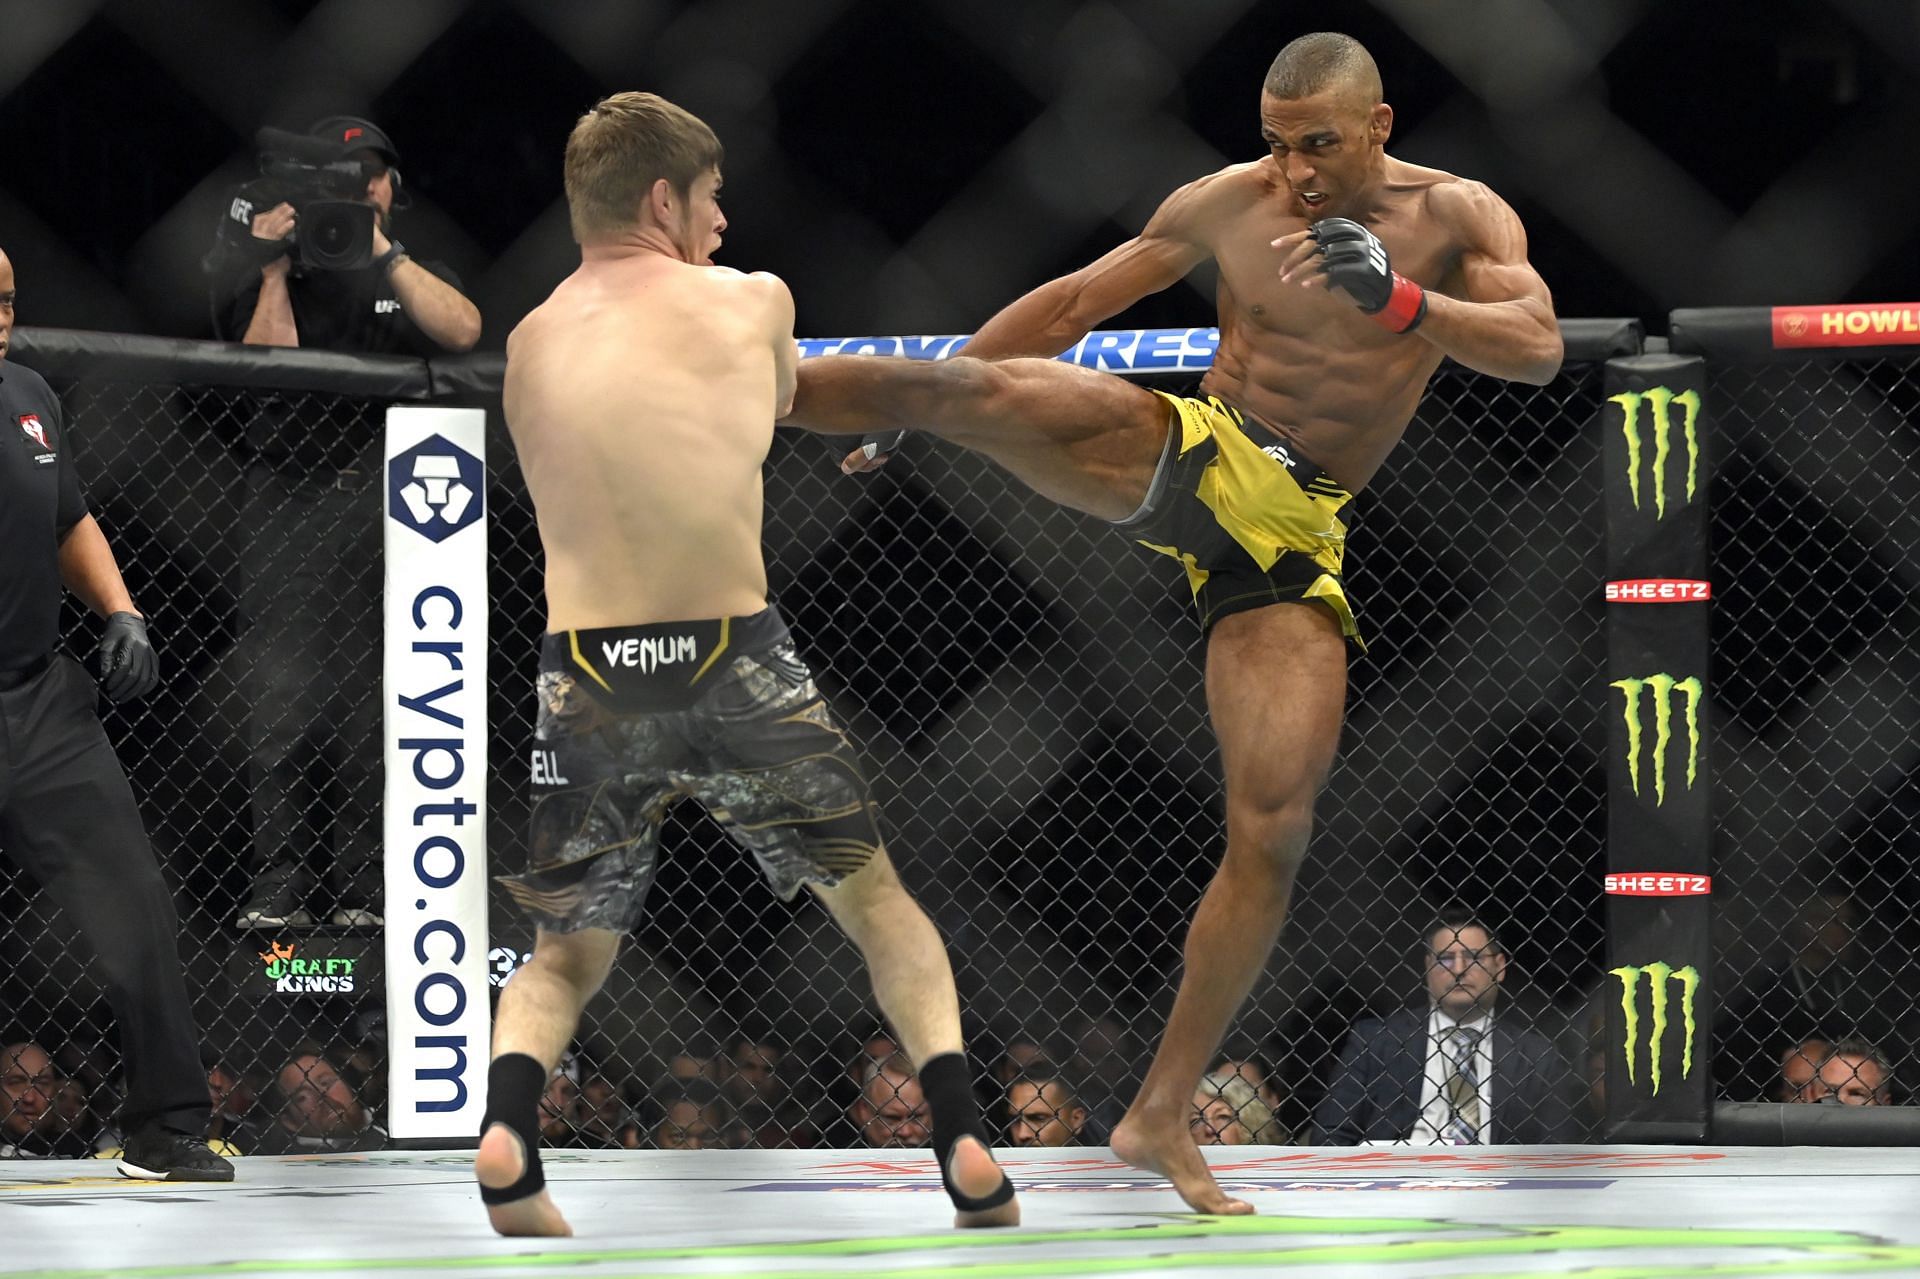 Edson Barboza uncorked a scary knockout against Billy Quarantillo